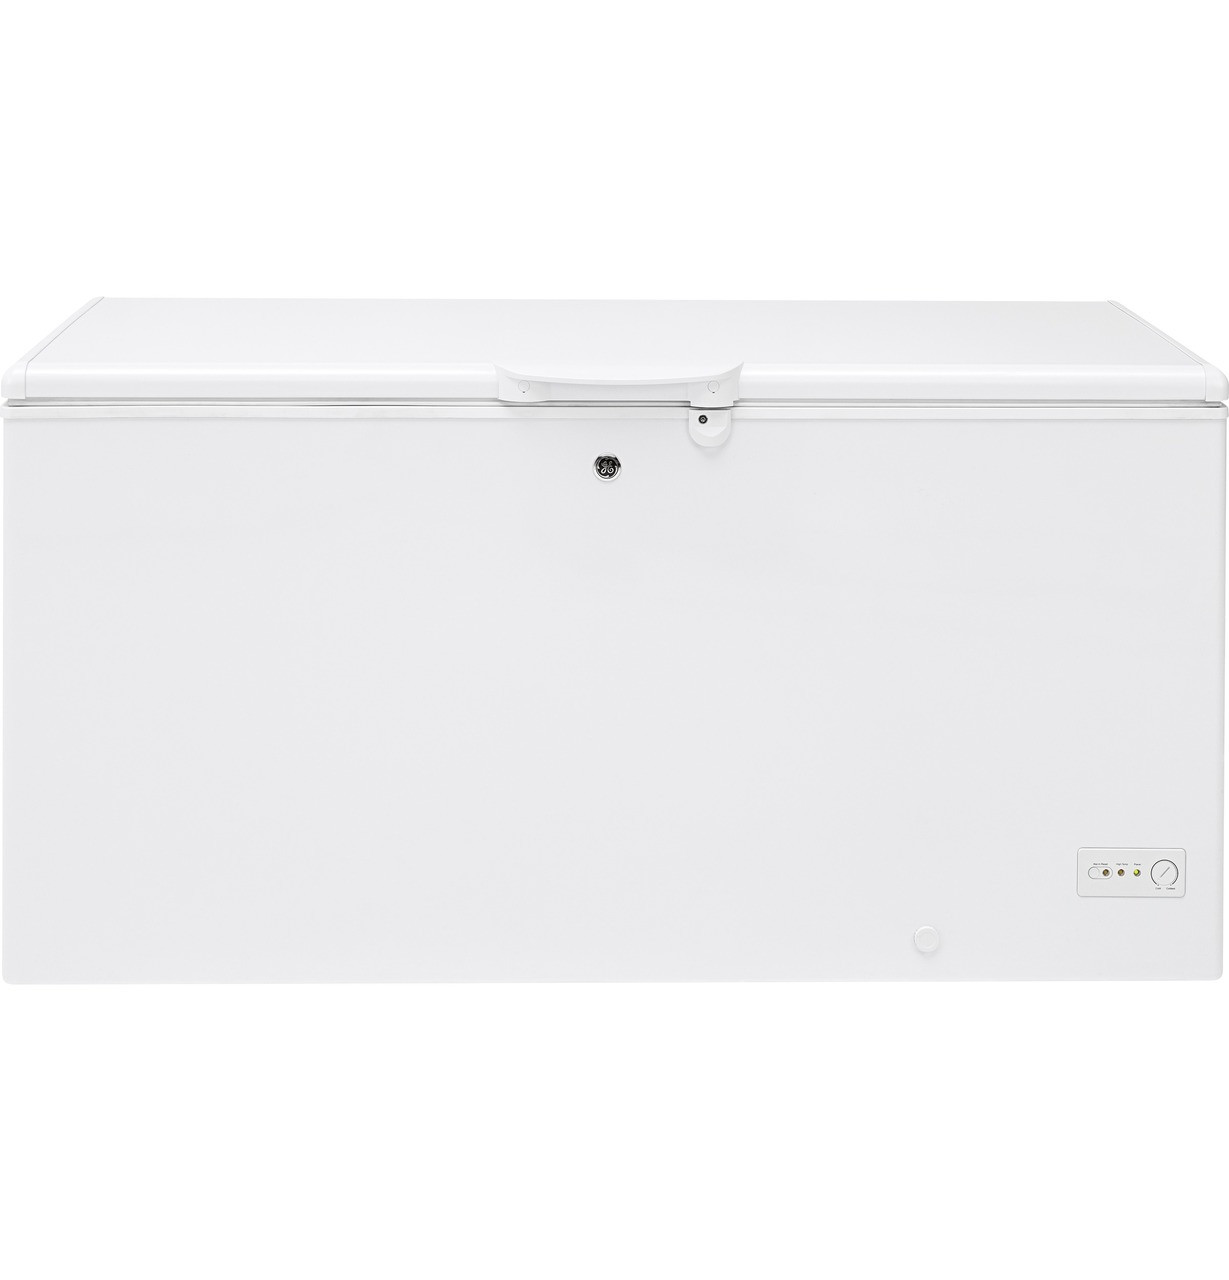 GE 10.7 Cu. Ft. Chest Freezer with Manual Defrost White FCM11SRWW